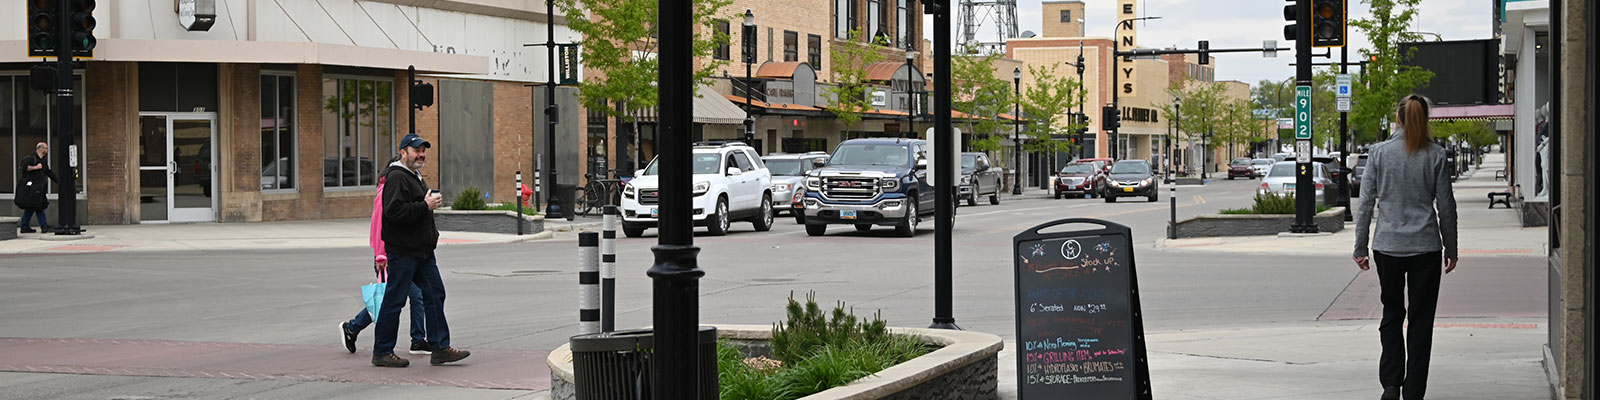 People walking in downtown Williston, which was recently renovated